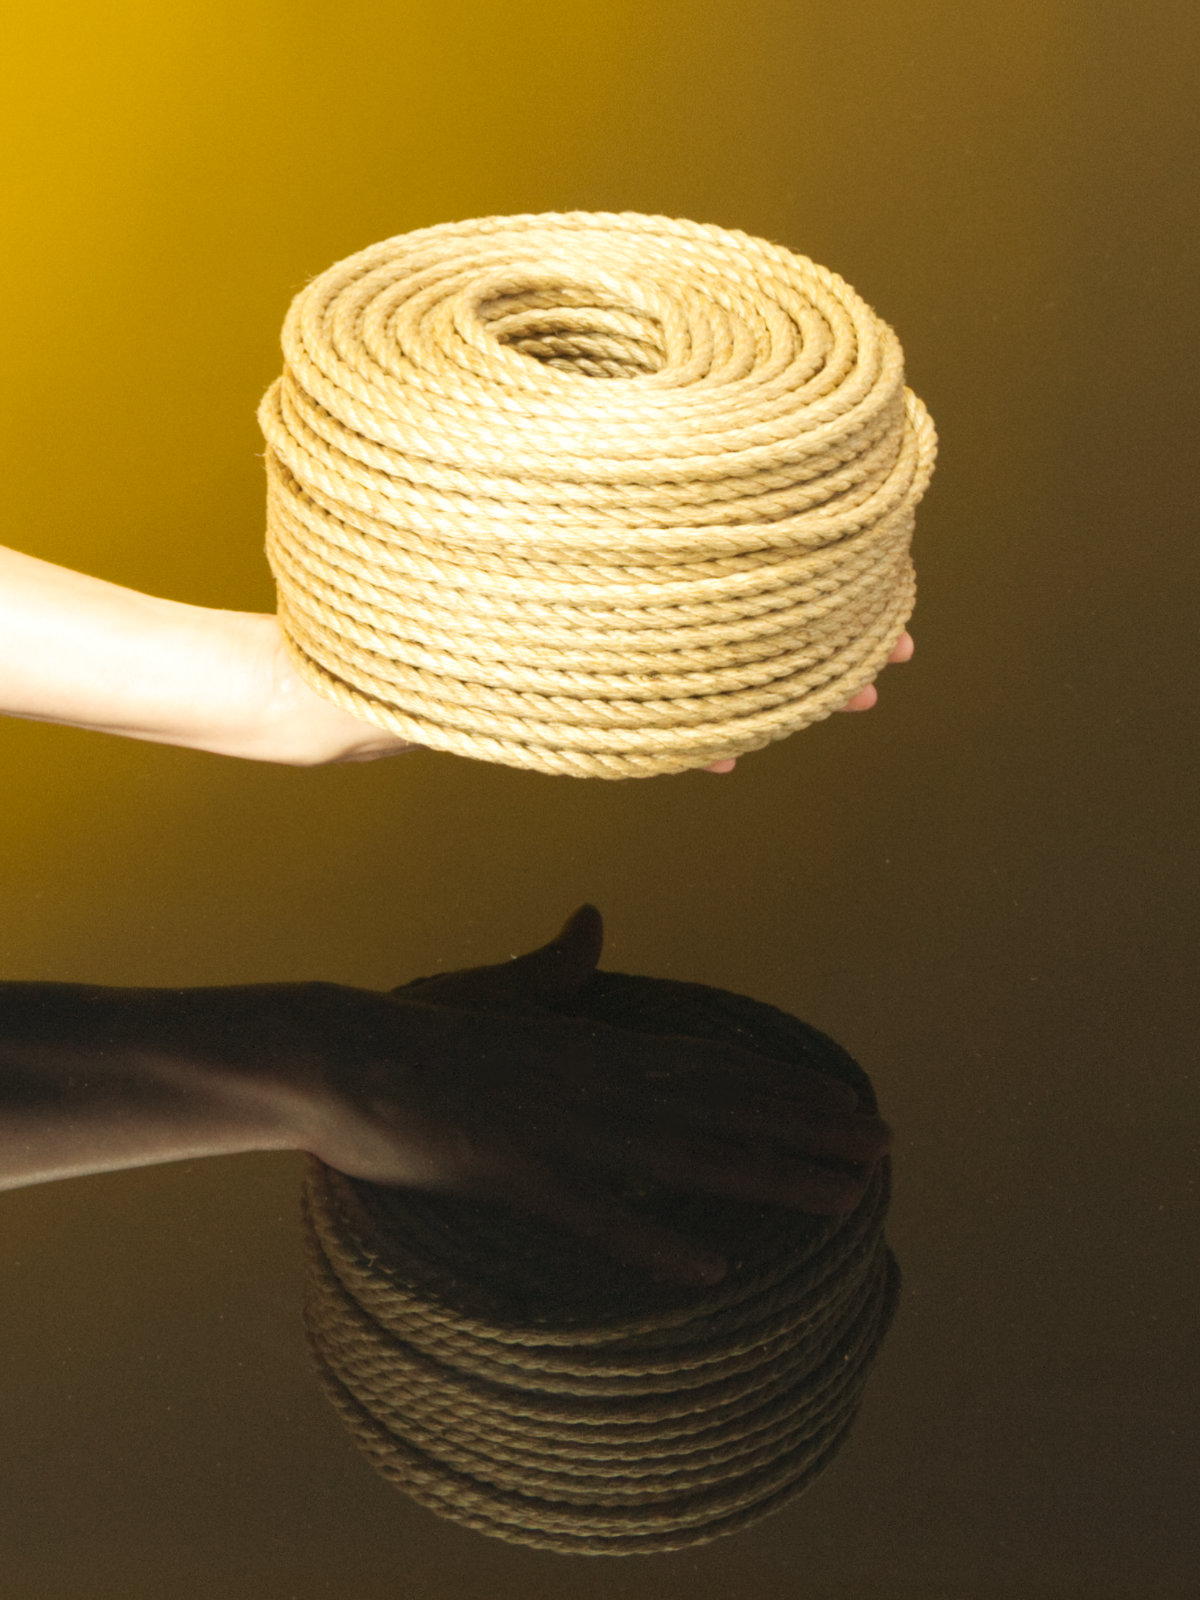 Jouyoku MINI-ROLL, ~1kg ready-for-use Japanese-made jute rope, various diameters, JBO-free, NEW 2023 BATCH!